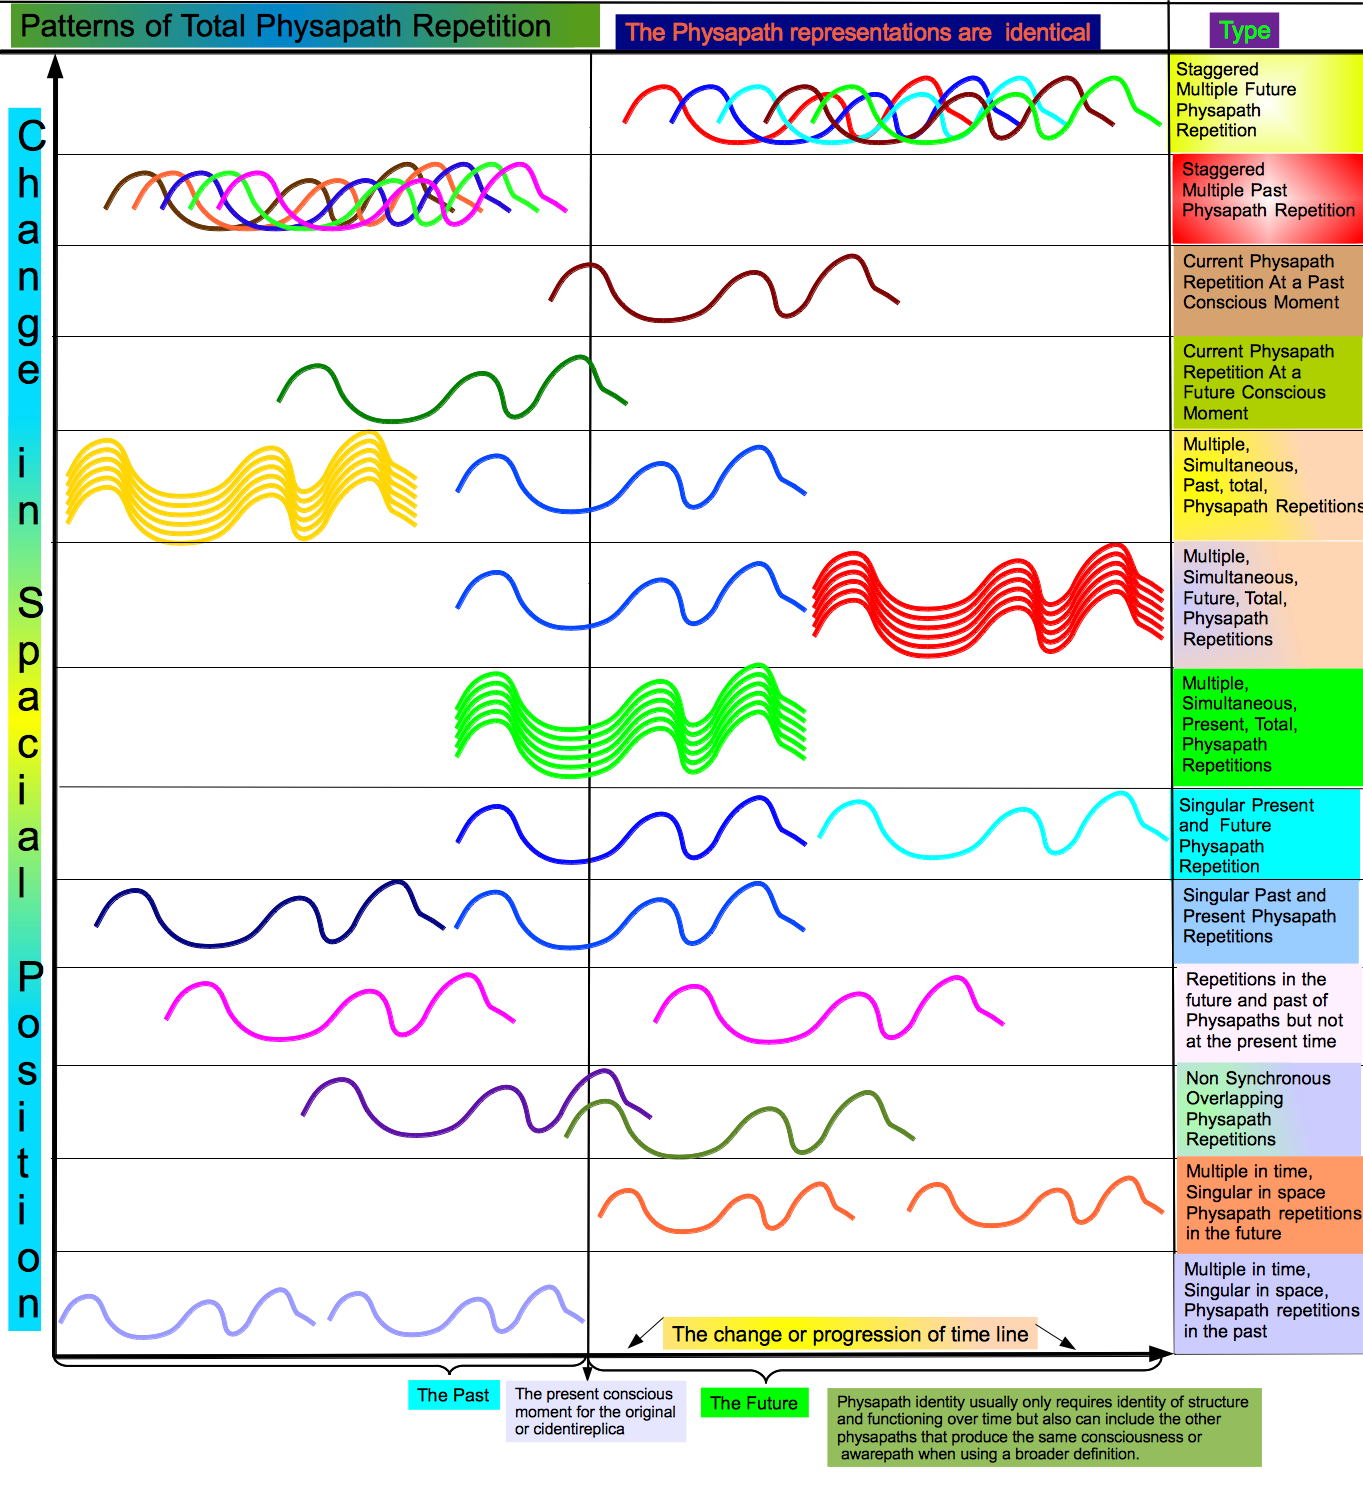 Patterns of Total Physapath Repetition.png